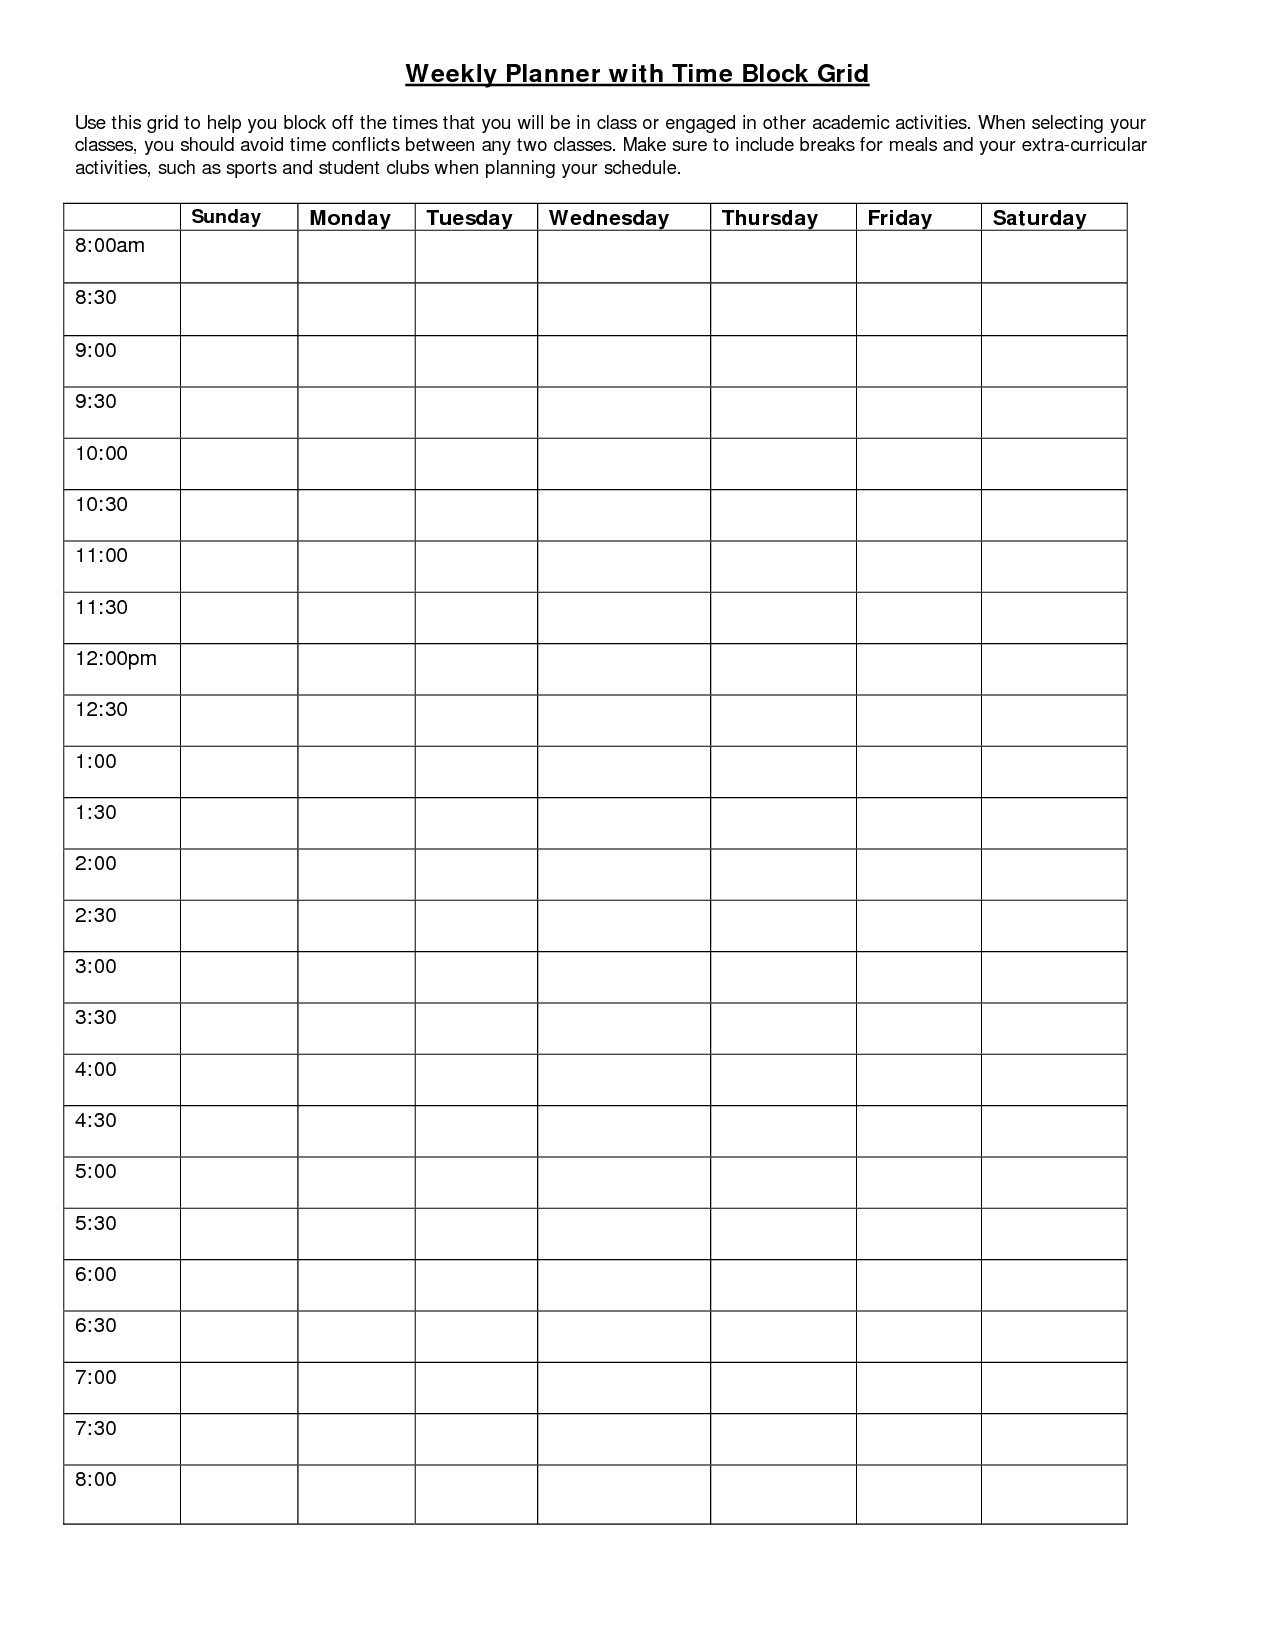 Weekly Planner With Time Block Grid | Good Ideas | Weekly Planner regarding Printable Weekly Planner With Times